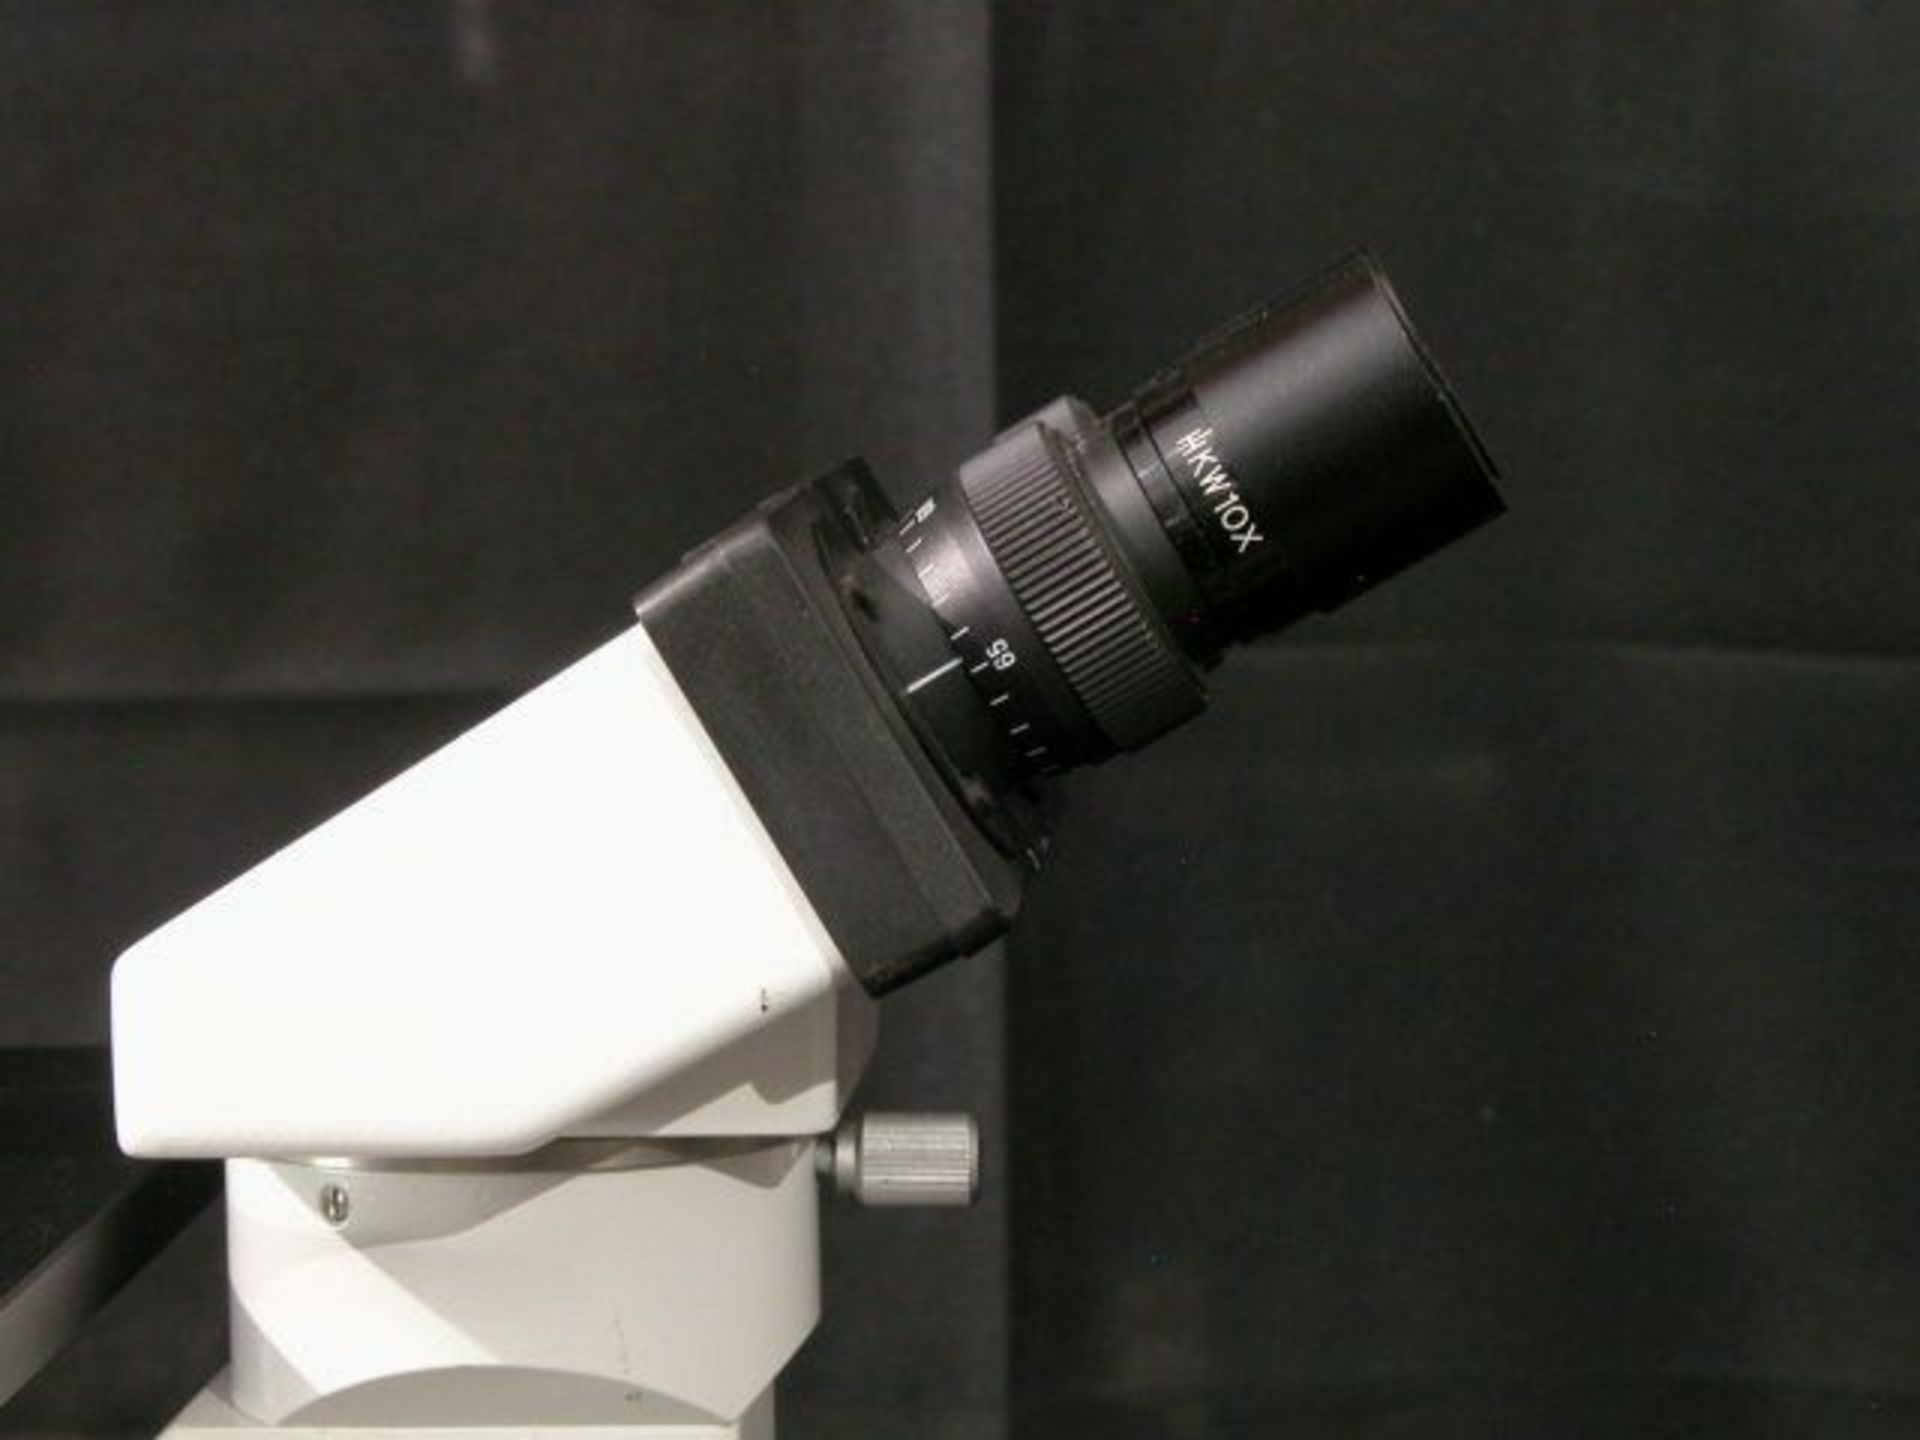 Hund Wetzlar Wilovert A Inverted Microscope 2 Ocular 3 Objectives, Qty 1, 330800442517 - Image 14 of 16